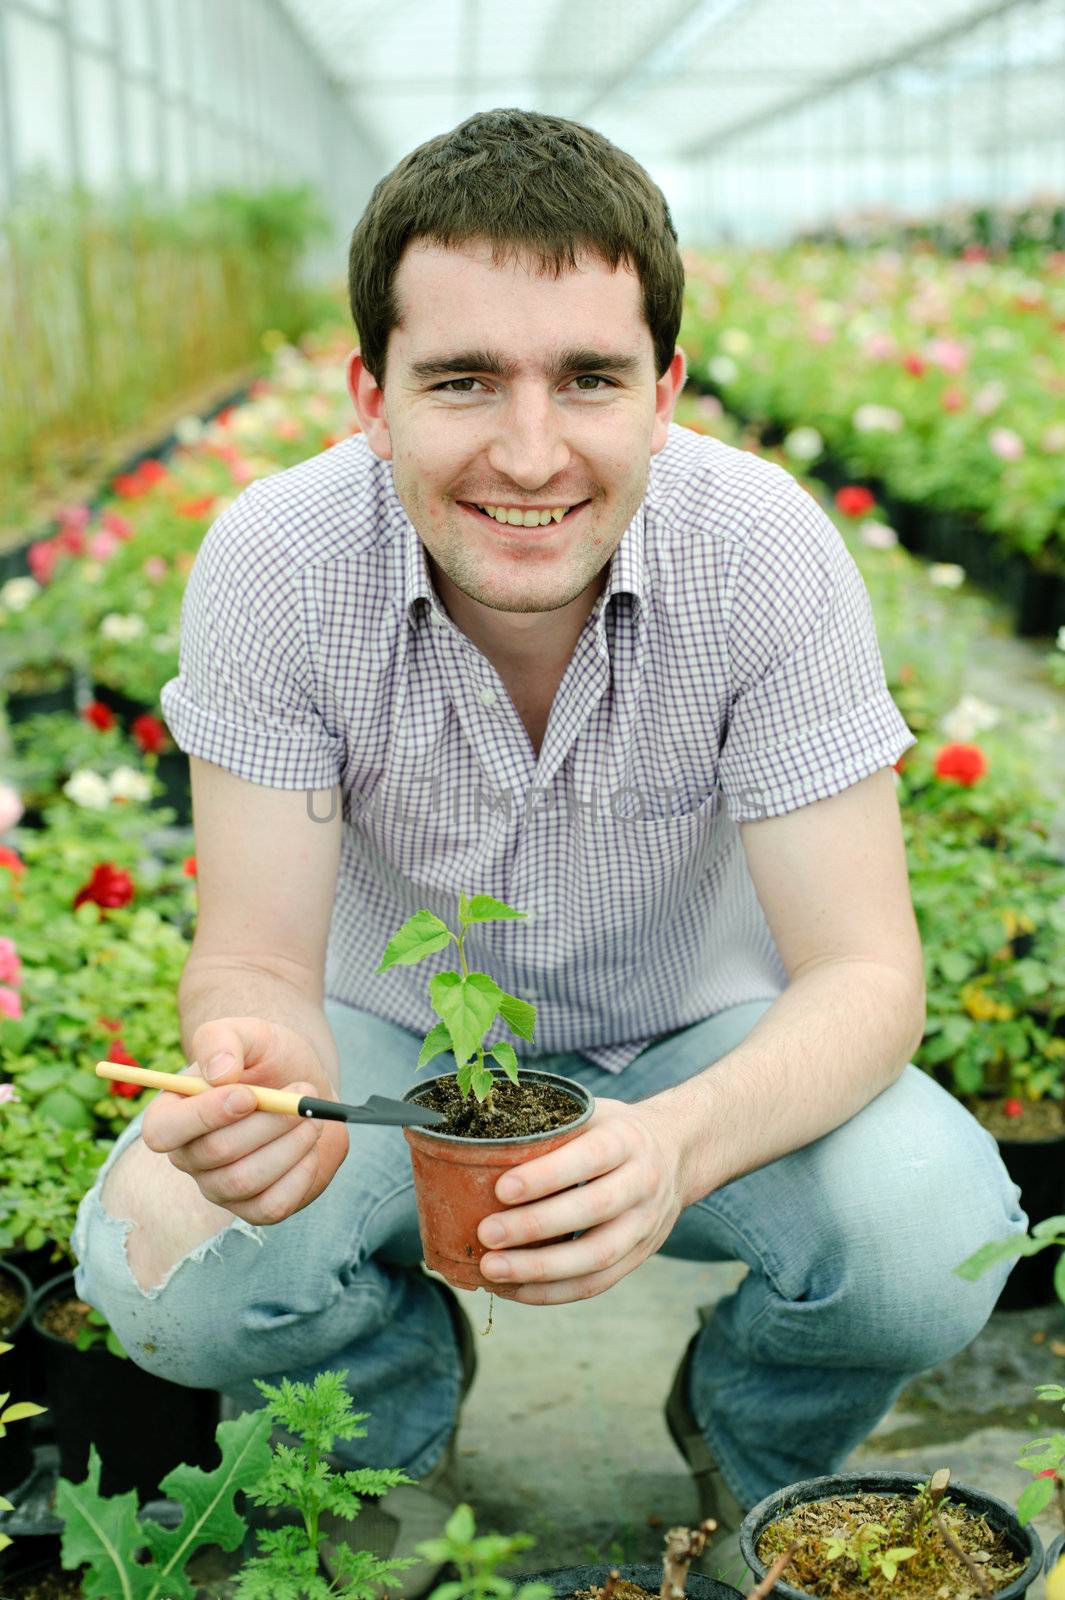 An image of a man with a plant in a pot